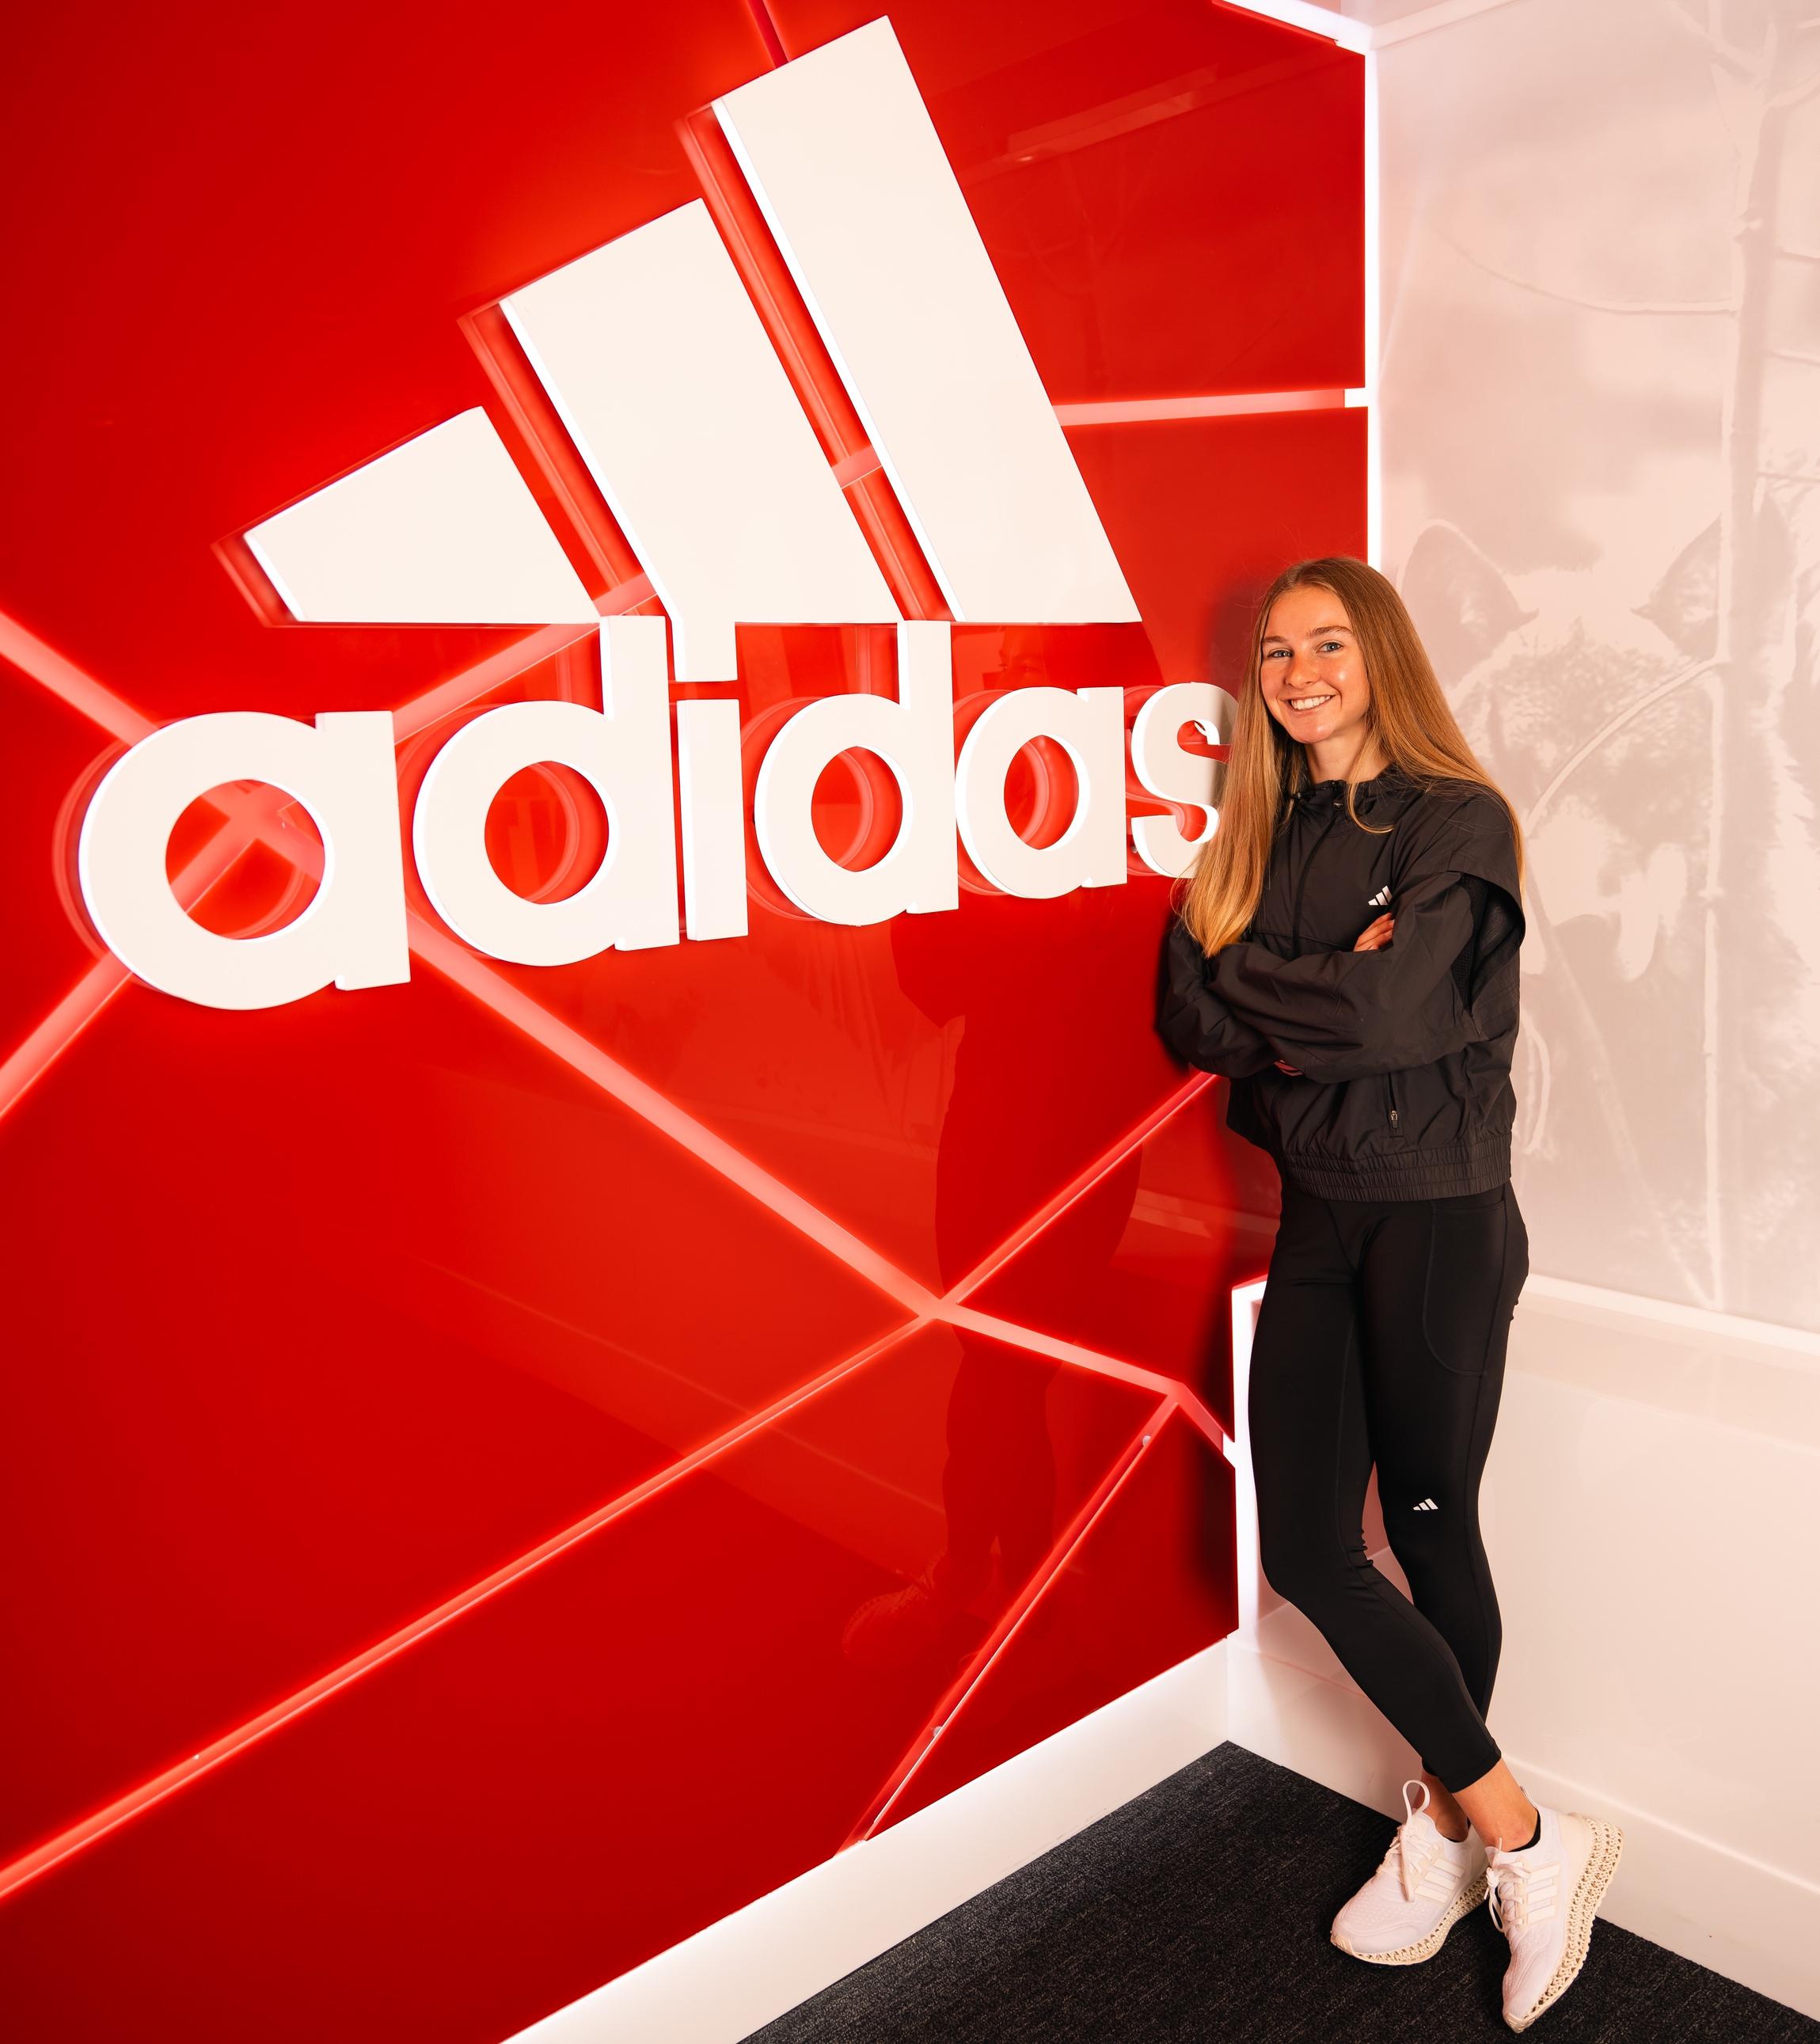 Katelyn Tuohy turns pro, signs with Adidas